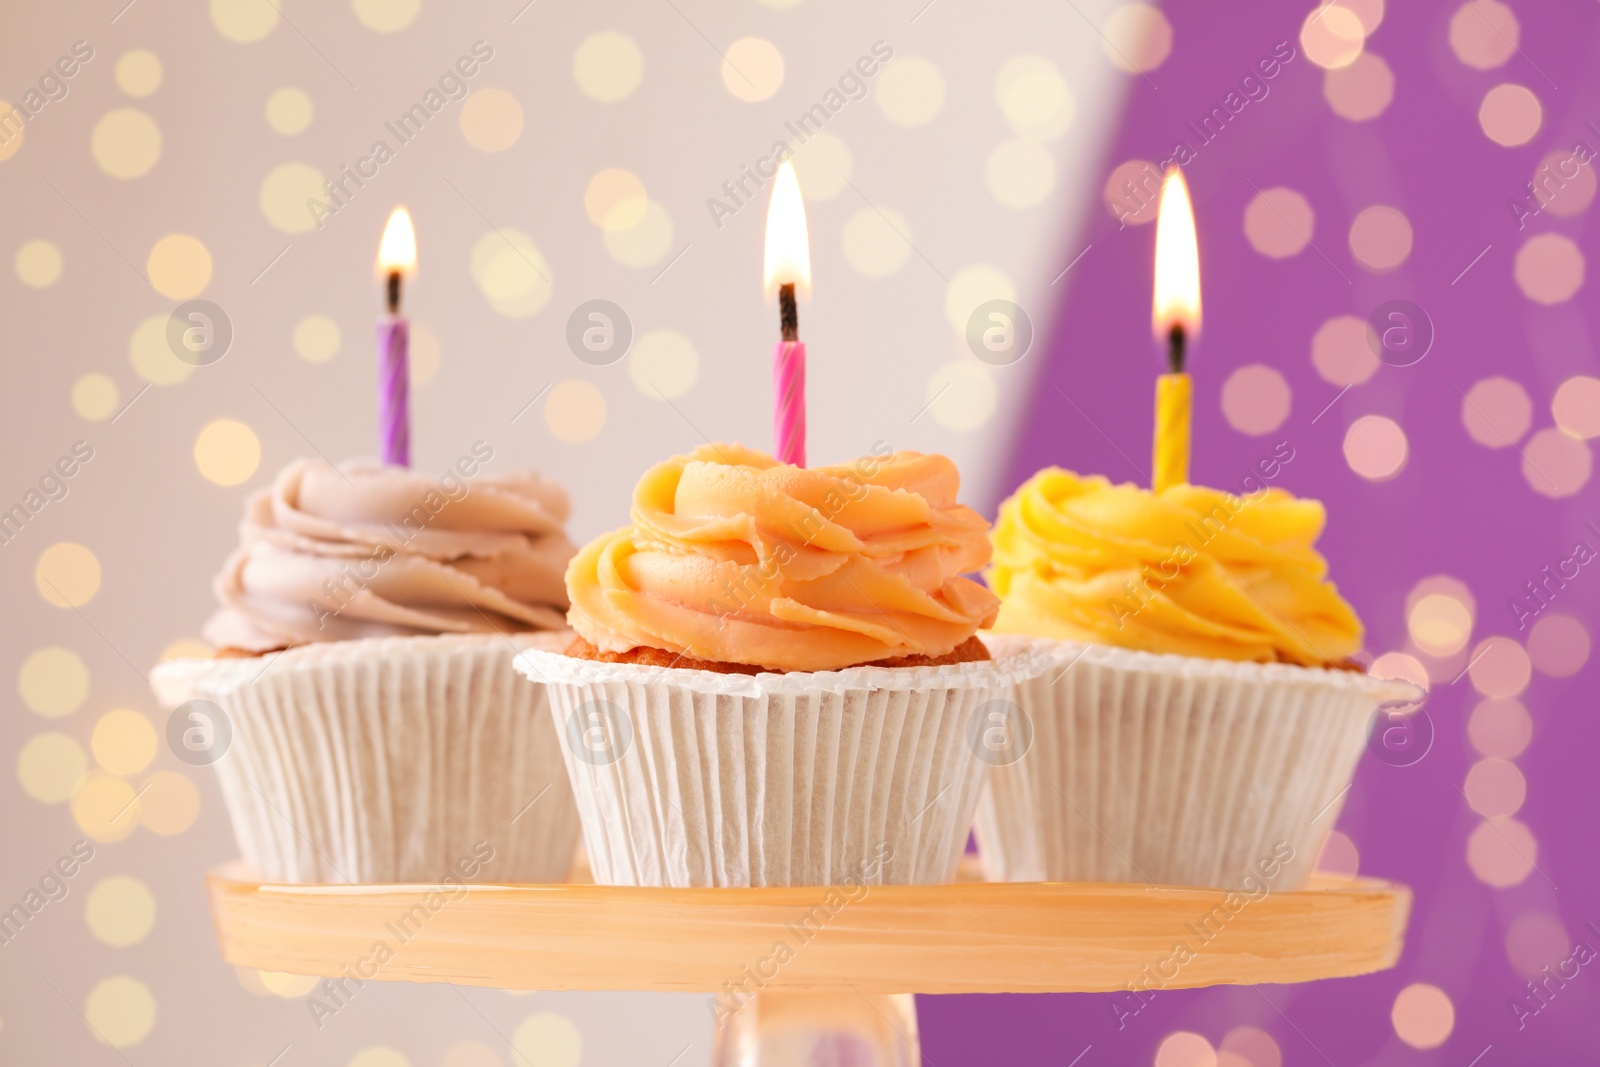 Photo of Tasty birthday cupcakes with candles on stand against blurred lights, closeup